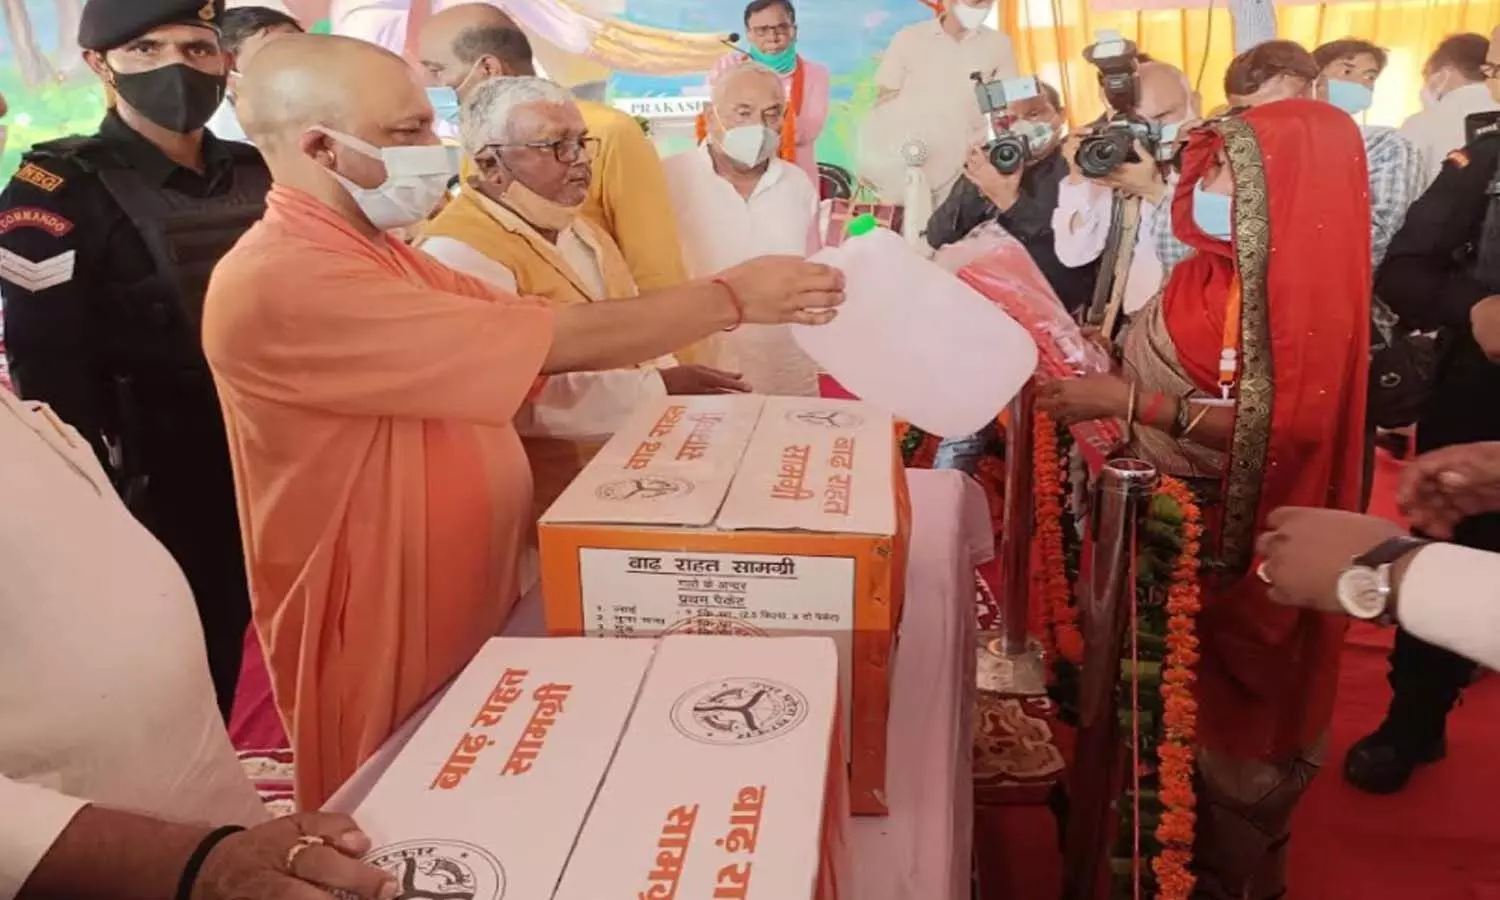 CM Yogi Adityanath giving relief material to the flood victims